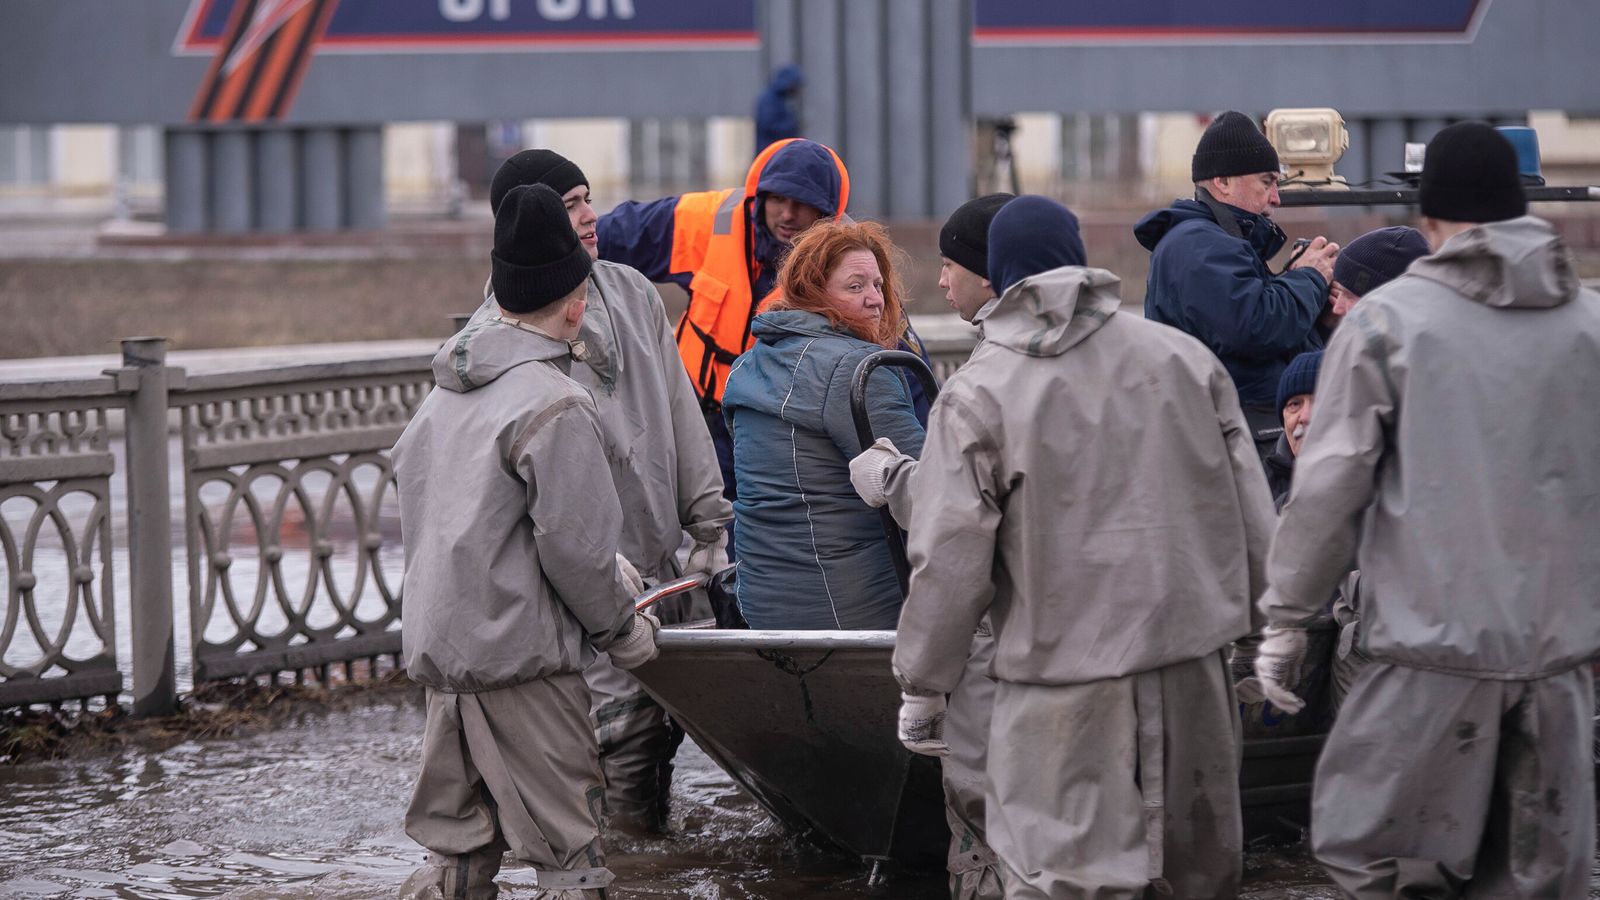 'there is a lot of water coming': kremlin warns floods will get worse as thousands evacuated